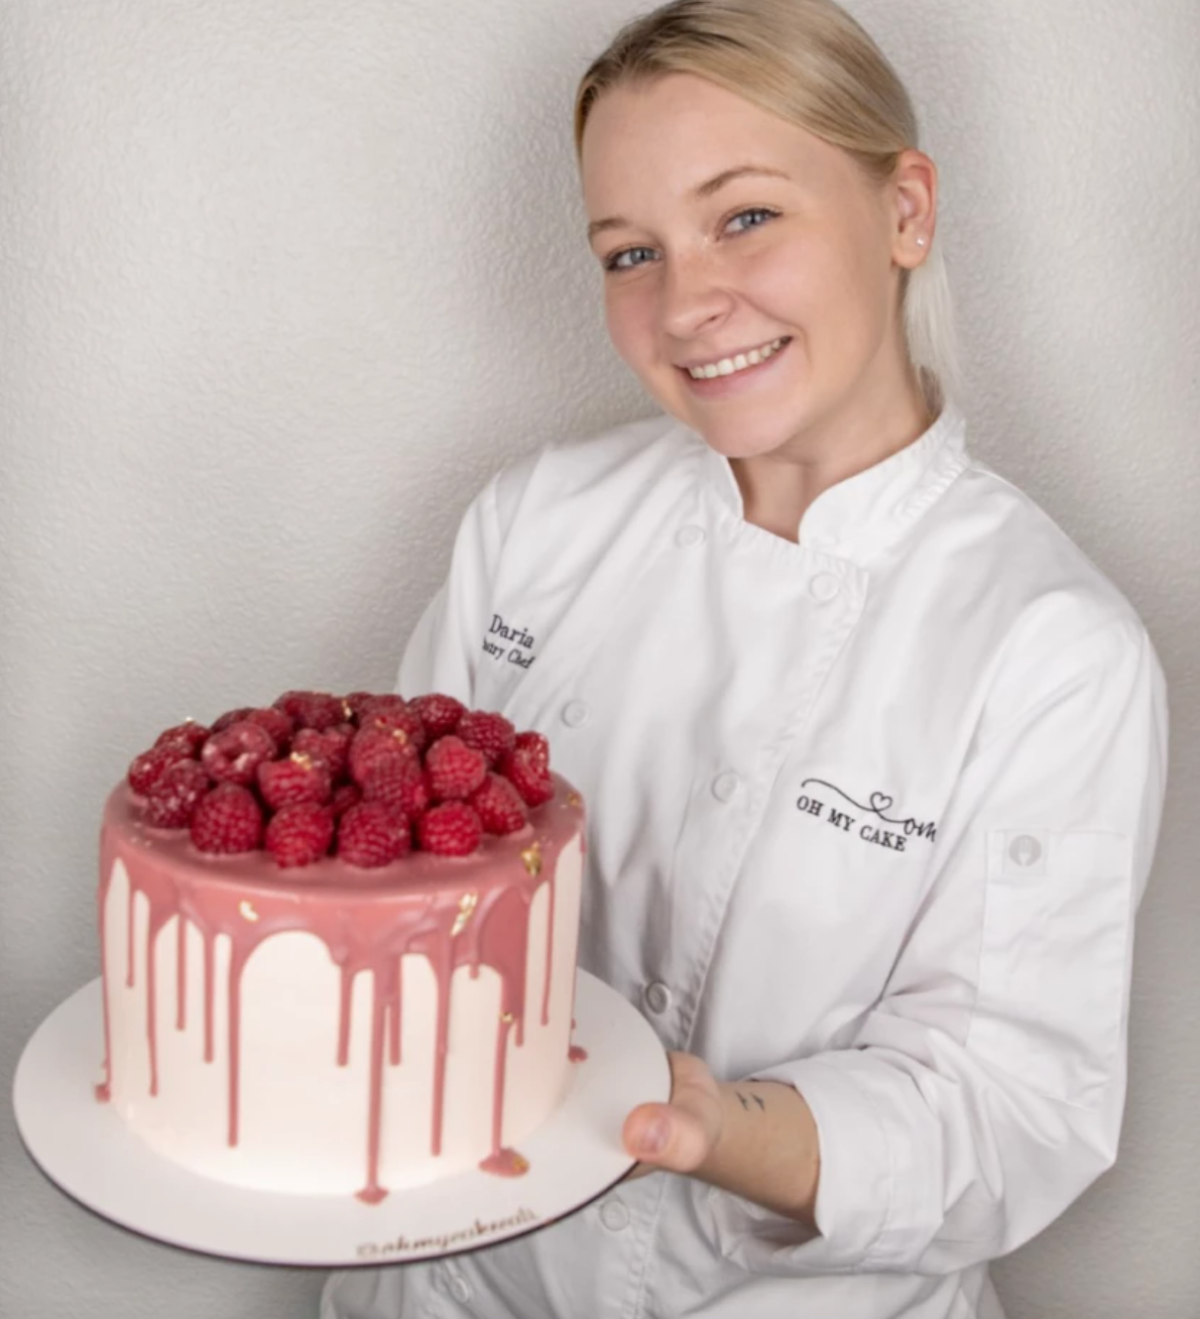 Daria Nadar, owner of "Oh My Cake" bakery holds a tall round cake